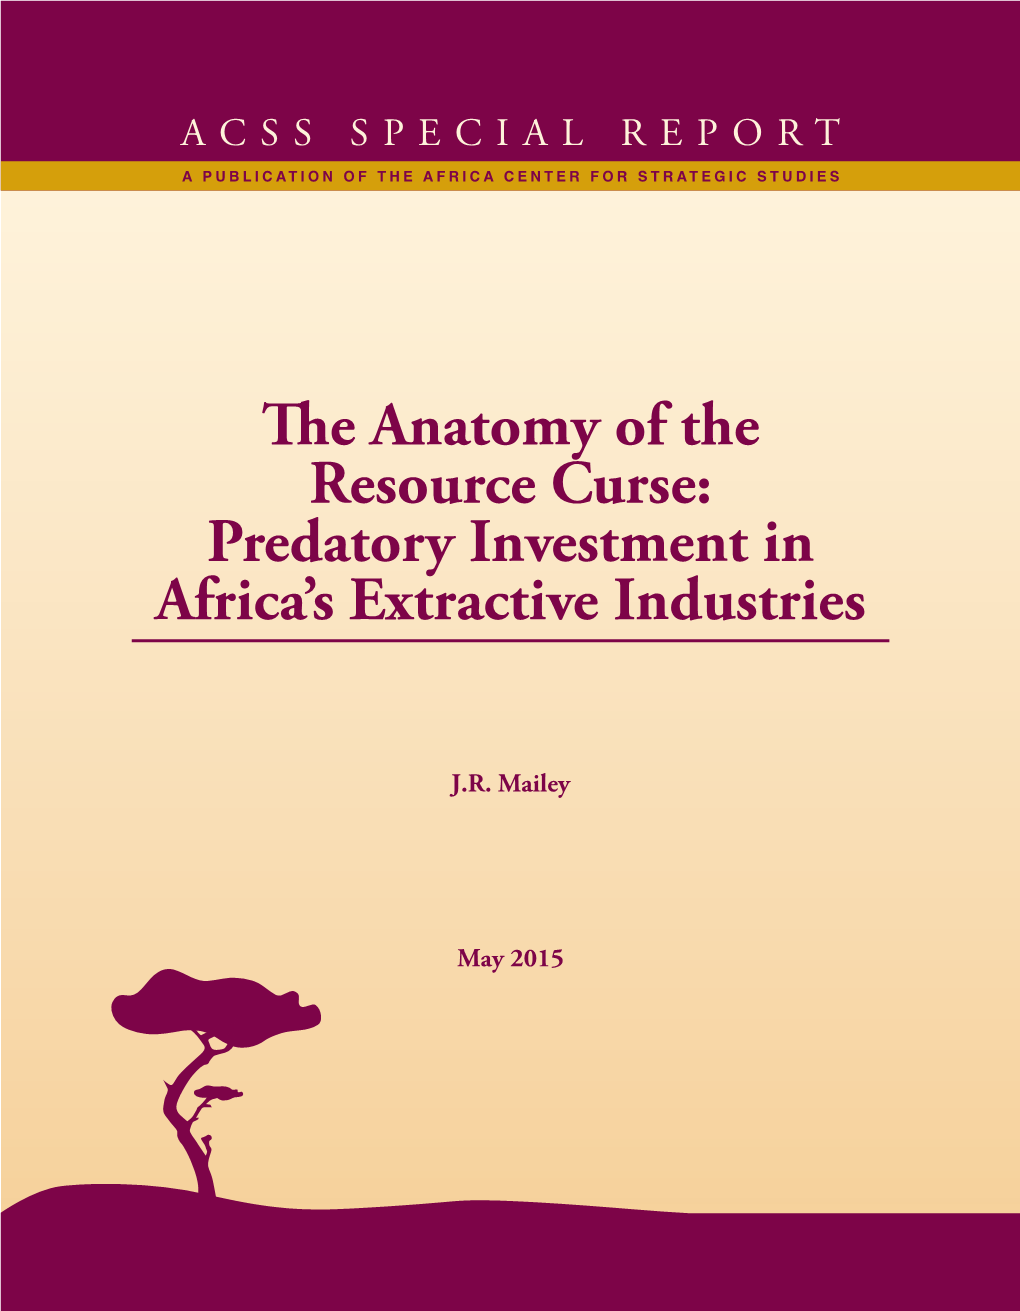 The Anatomy of the Resource Curse: Predatory Investment in Africa's